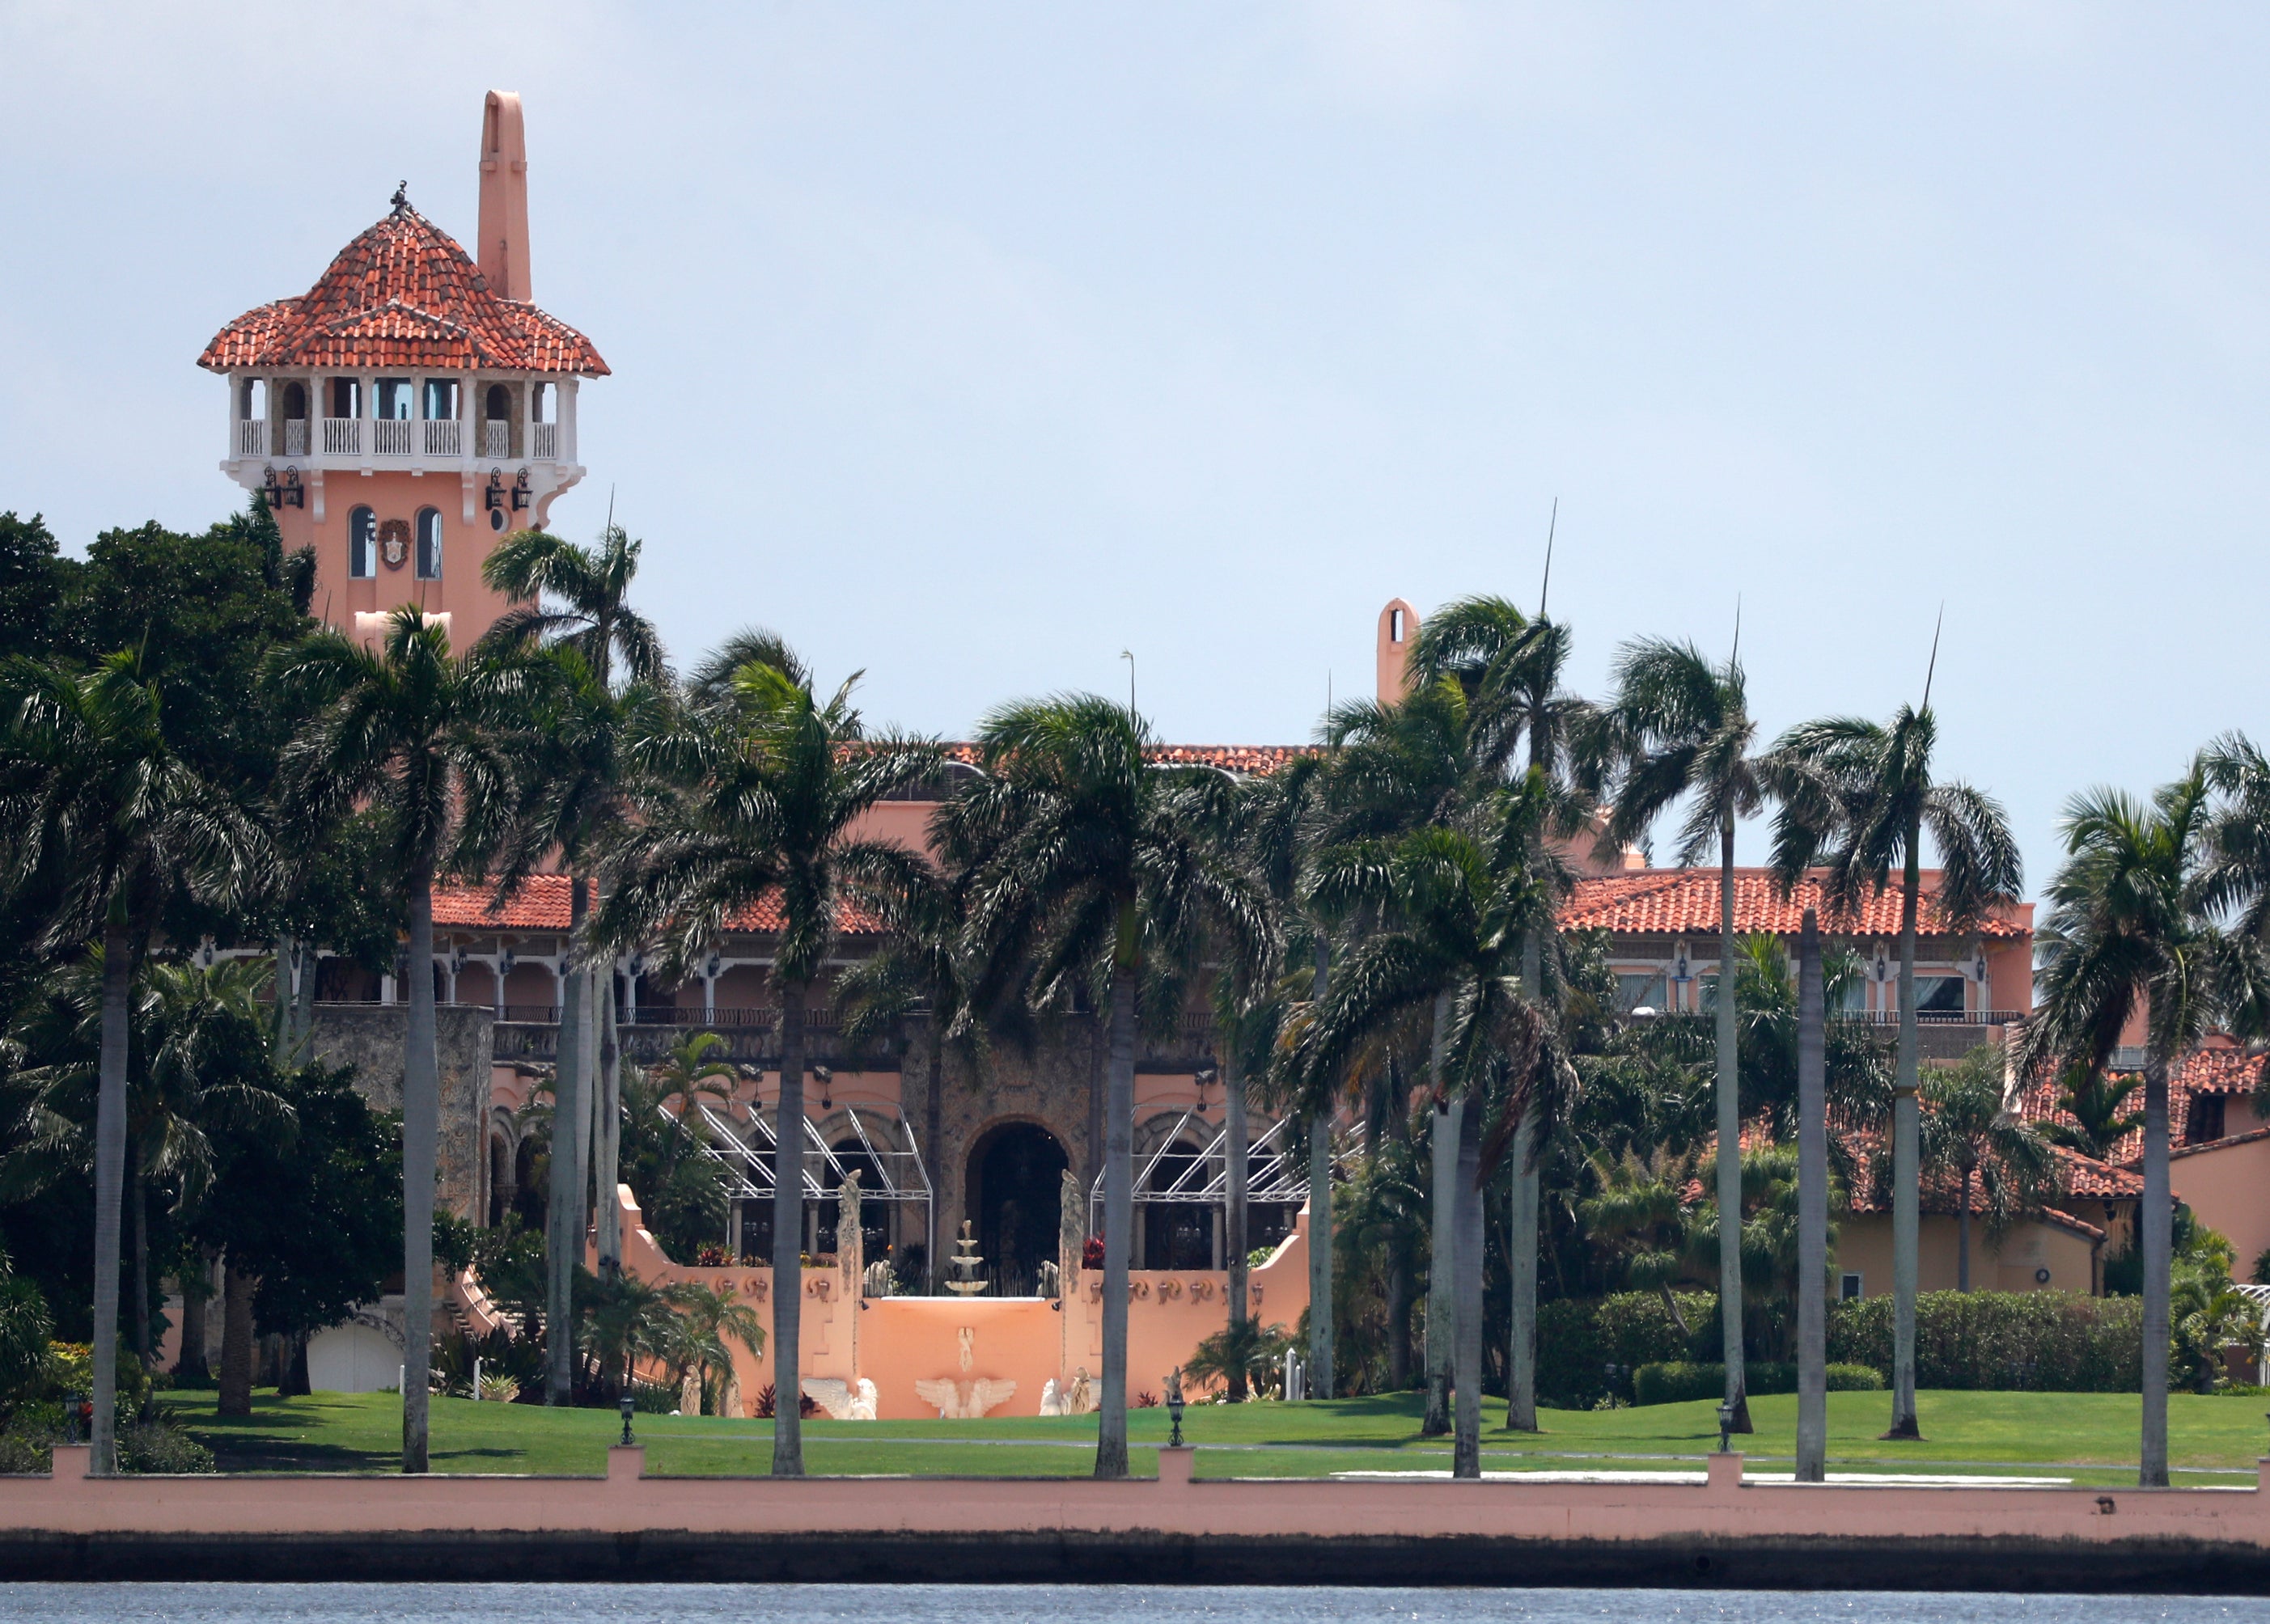 President Donald Trump’s Mar-a-Lago estate is shown in a Wednesday 10 July 2019 file photo, in Palm Beach, Florida